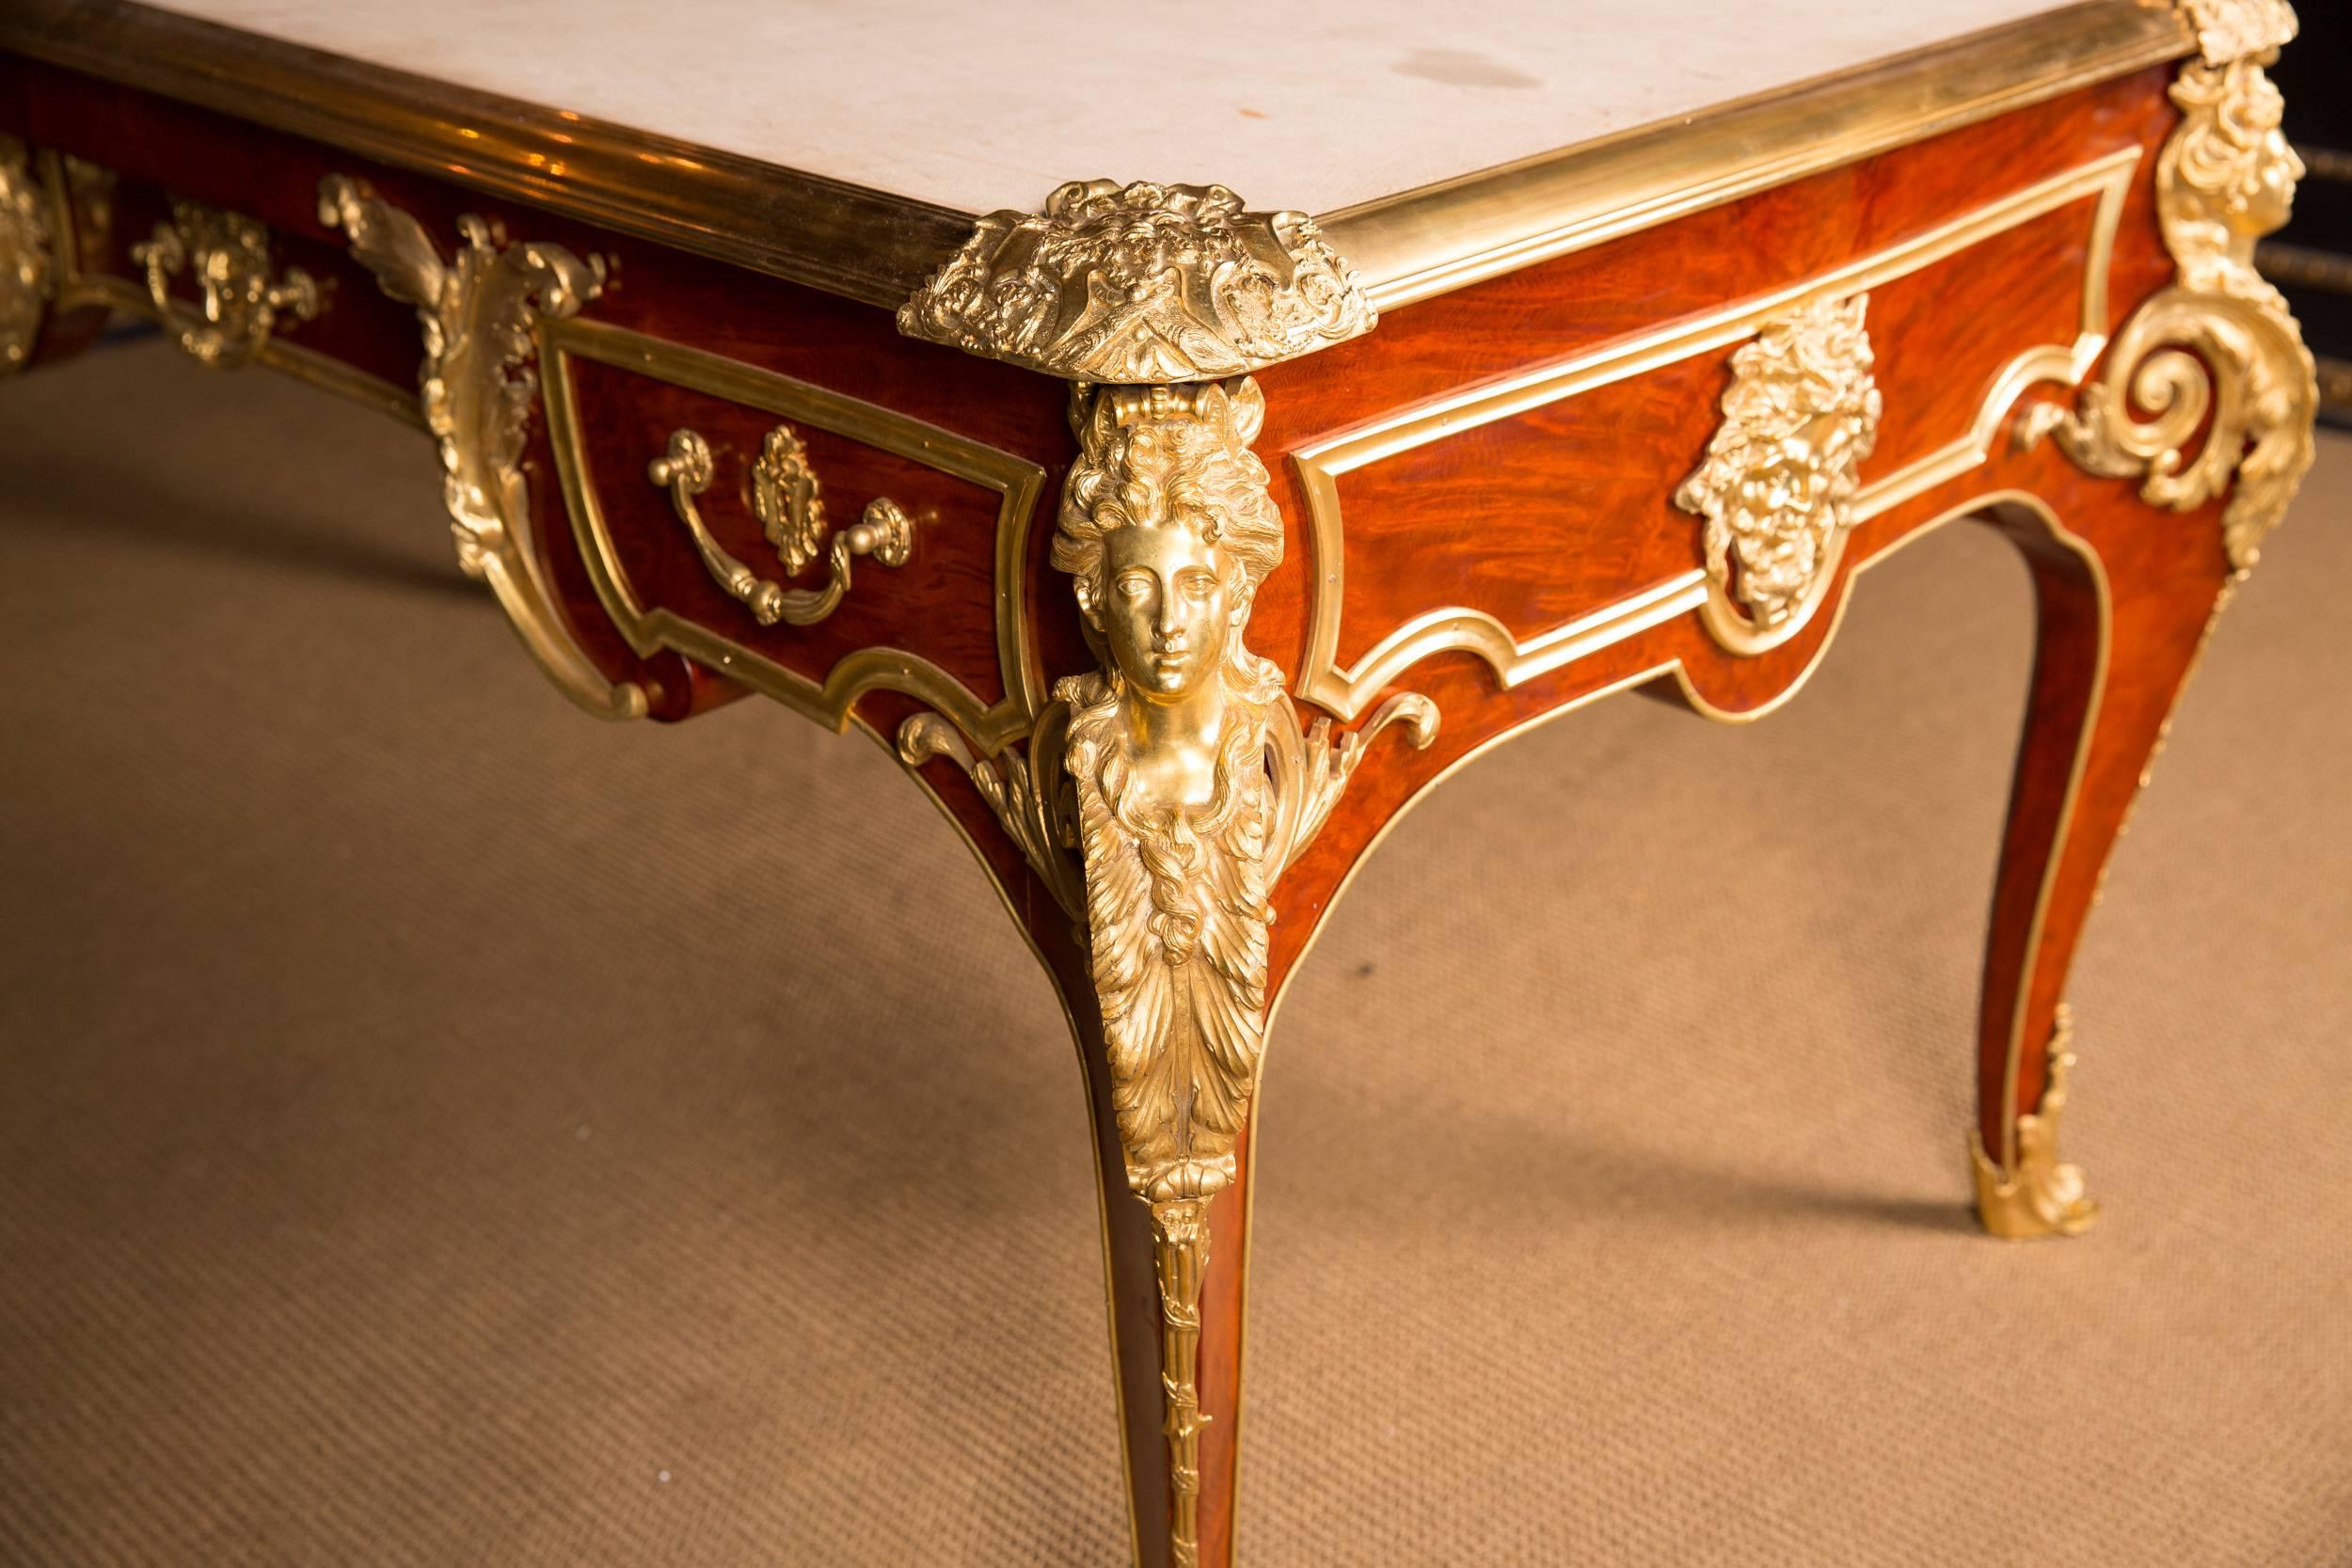 Bronzed Majestic French Bureau Plat Desk According to Andre C. Boulle